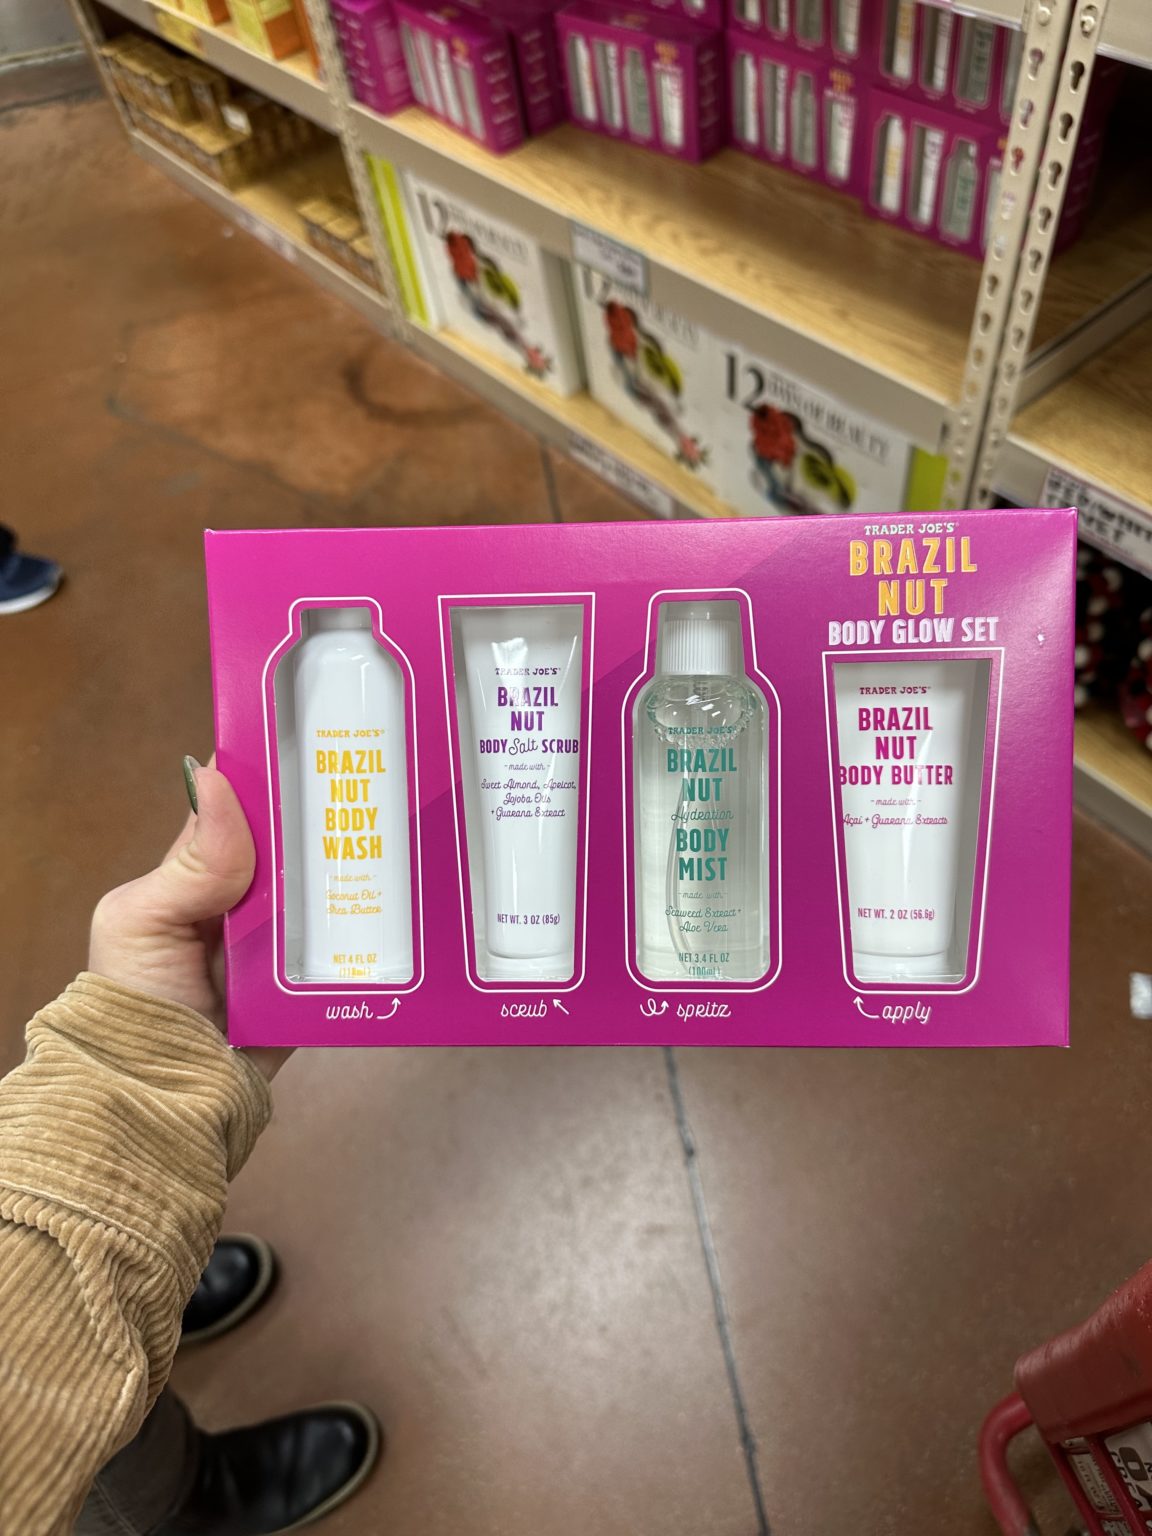 15 Trader Joe's Gift Ideas for Everyone on Your List - Blogilates